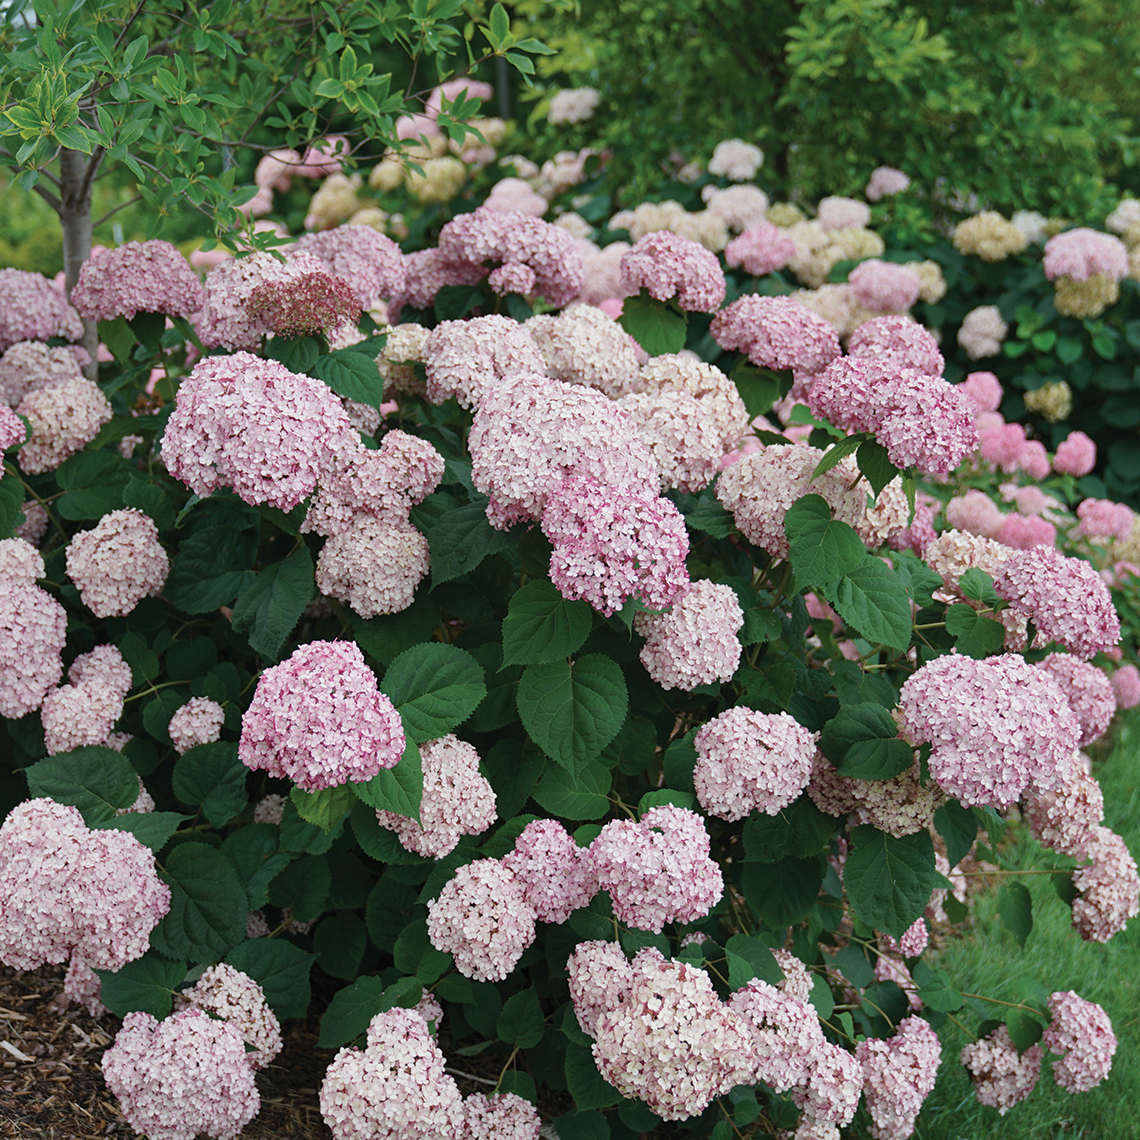 A specimen of Incrediball Blush hydrangea covered in large pink blooms